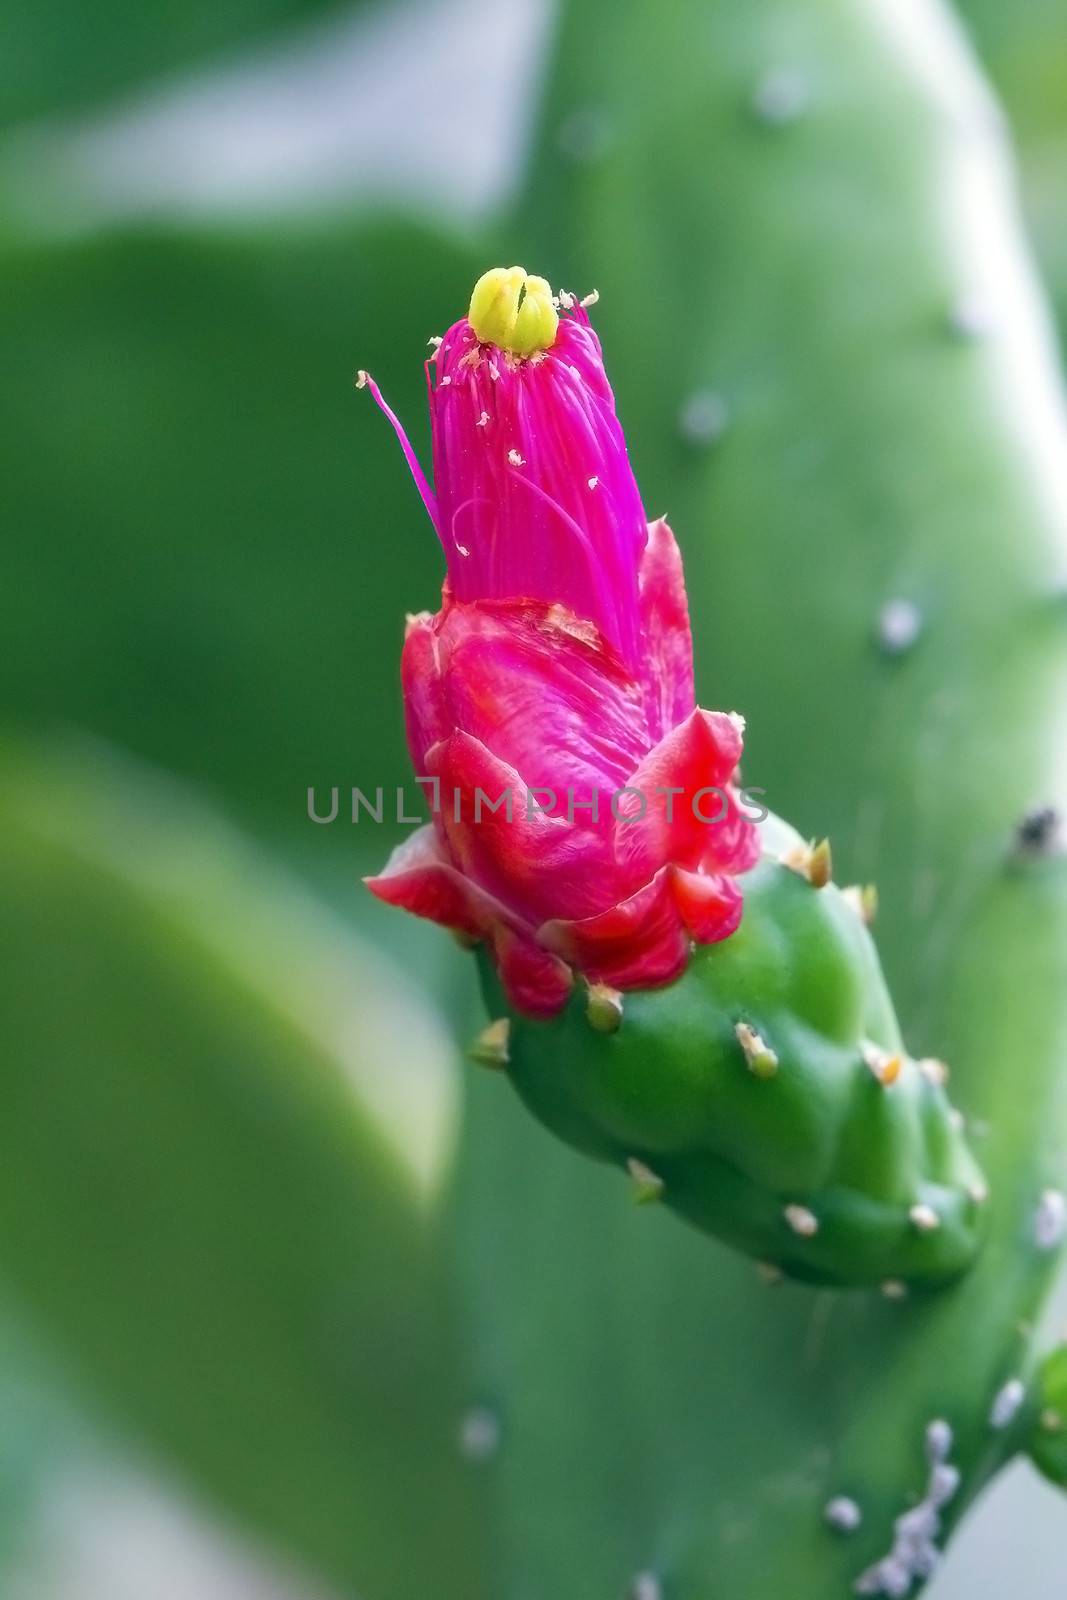 Cactus Flower by olovedog